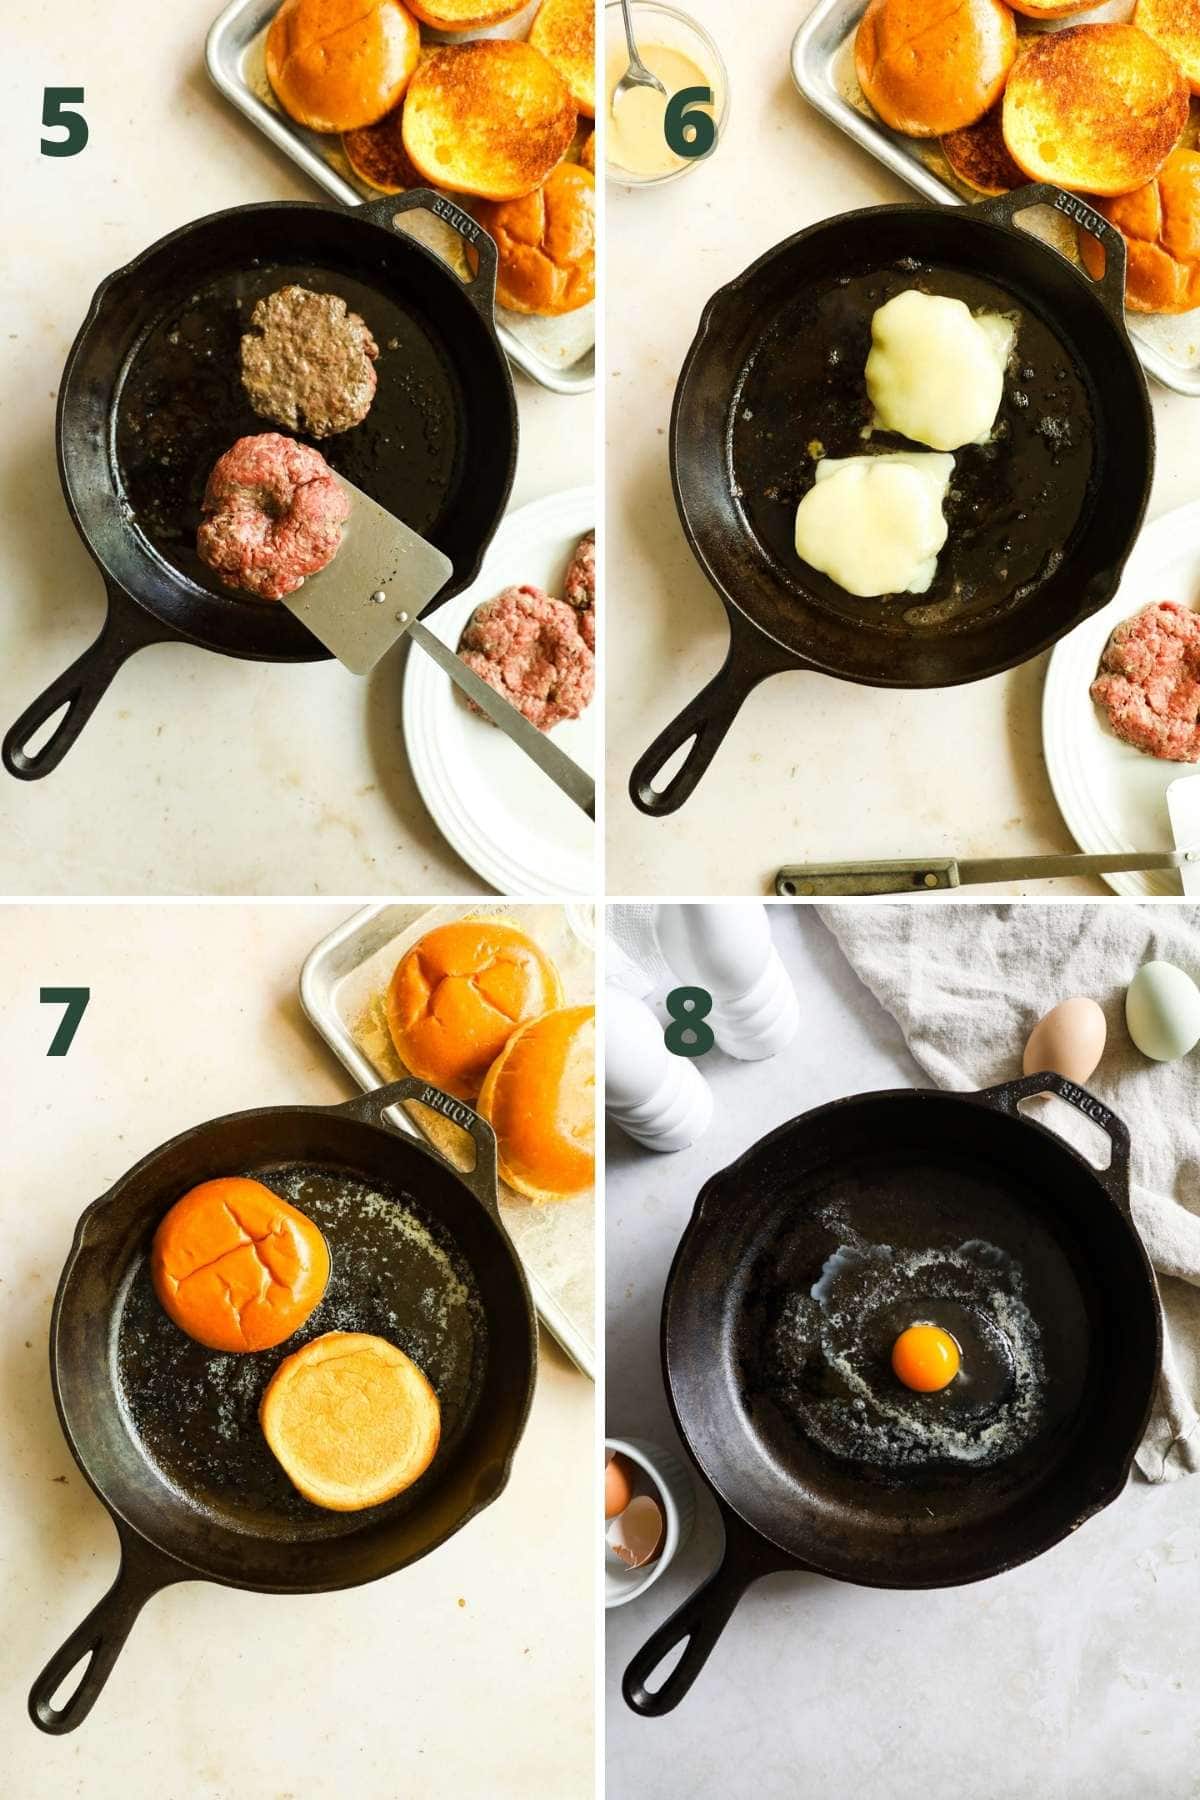 Steps to make a fried egg burger, including how to cook burger in a skillet, melt cheese, toast buns, and fry the egg.